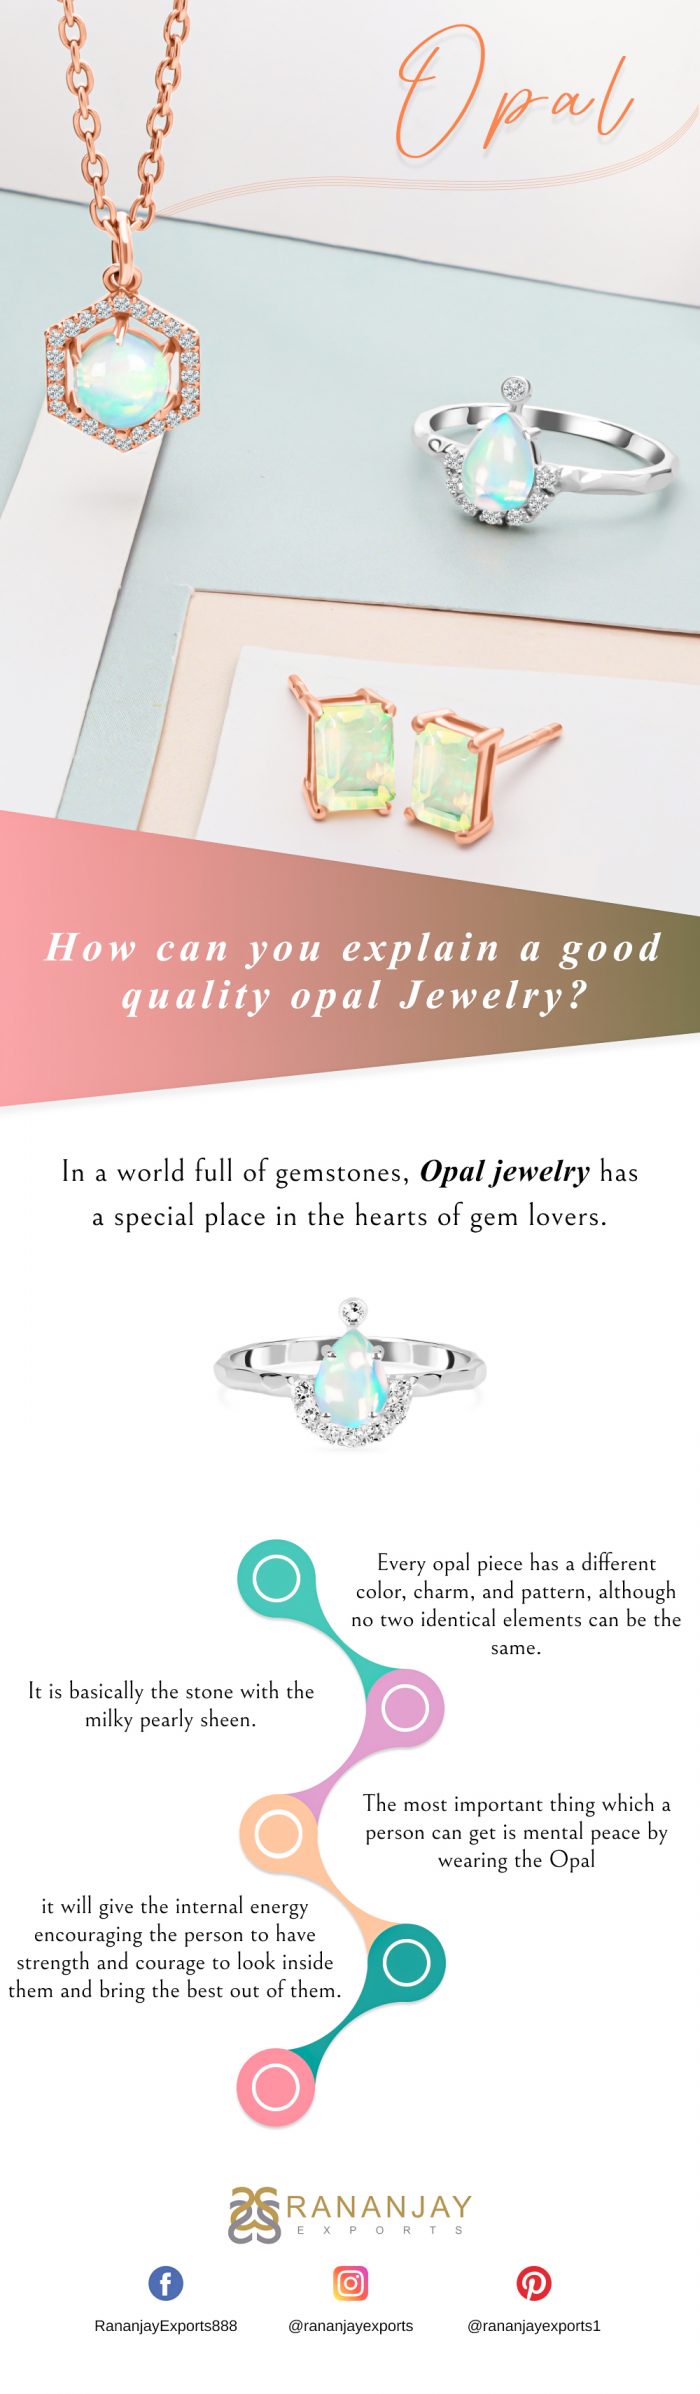 Buy Natural Homemade Opal Jewelry at Wholesale Price.